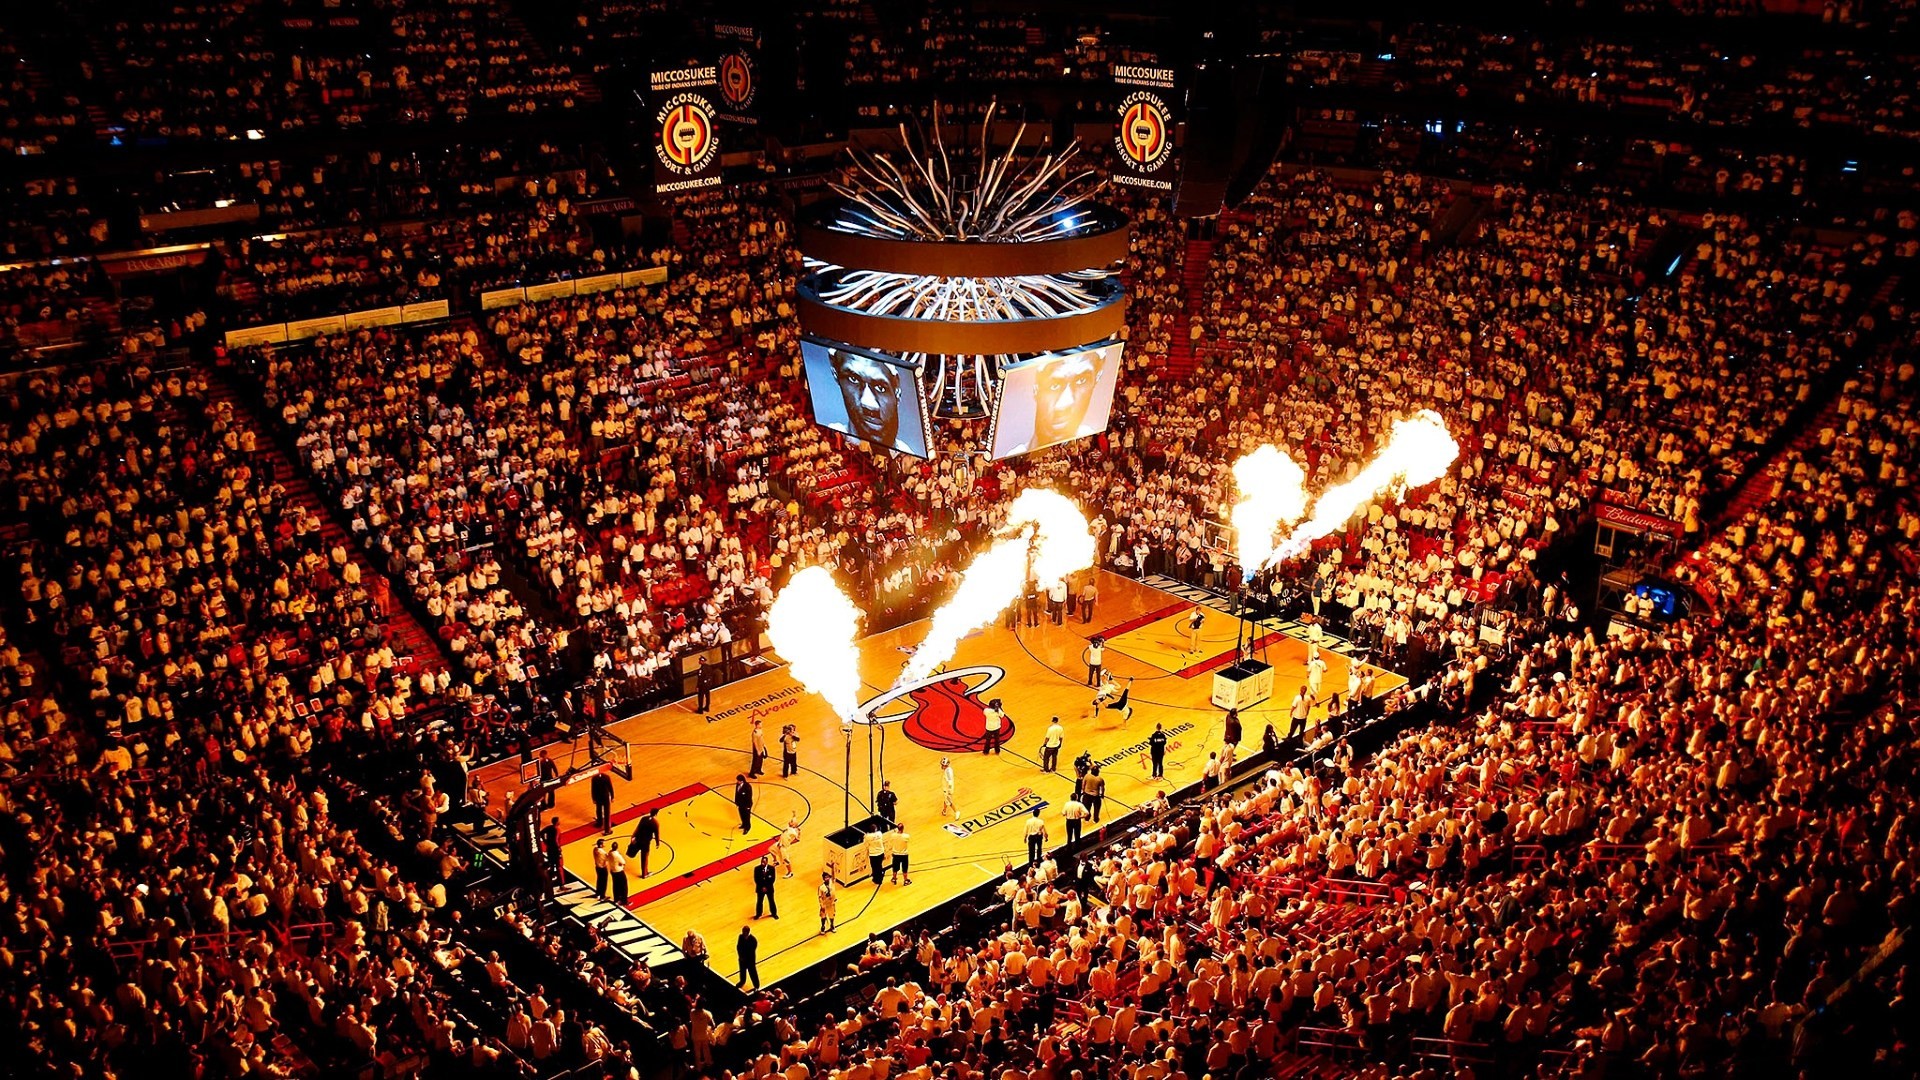 1920x1080 Miami Heat American Airlines Arena 1080p HD Wallpaper Background